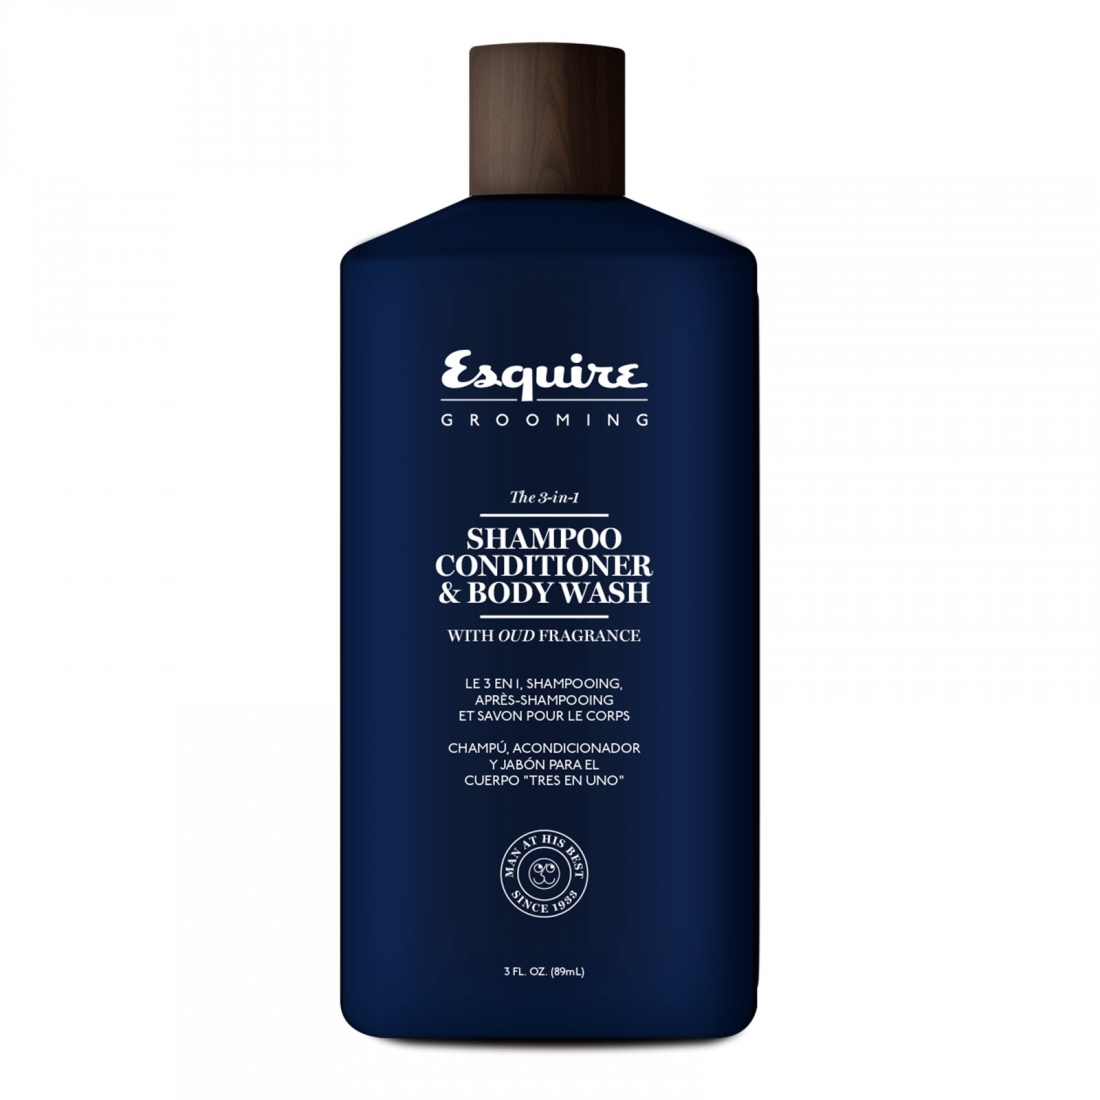 Après-shampoing, Gel Douche, Shampoing 'The 3 en 1 Esquire Grooming' - 89 ml